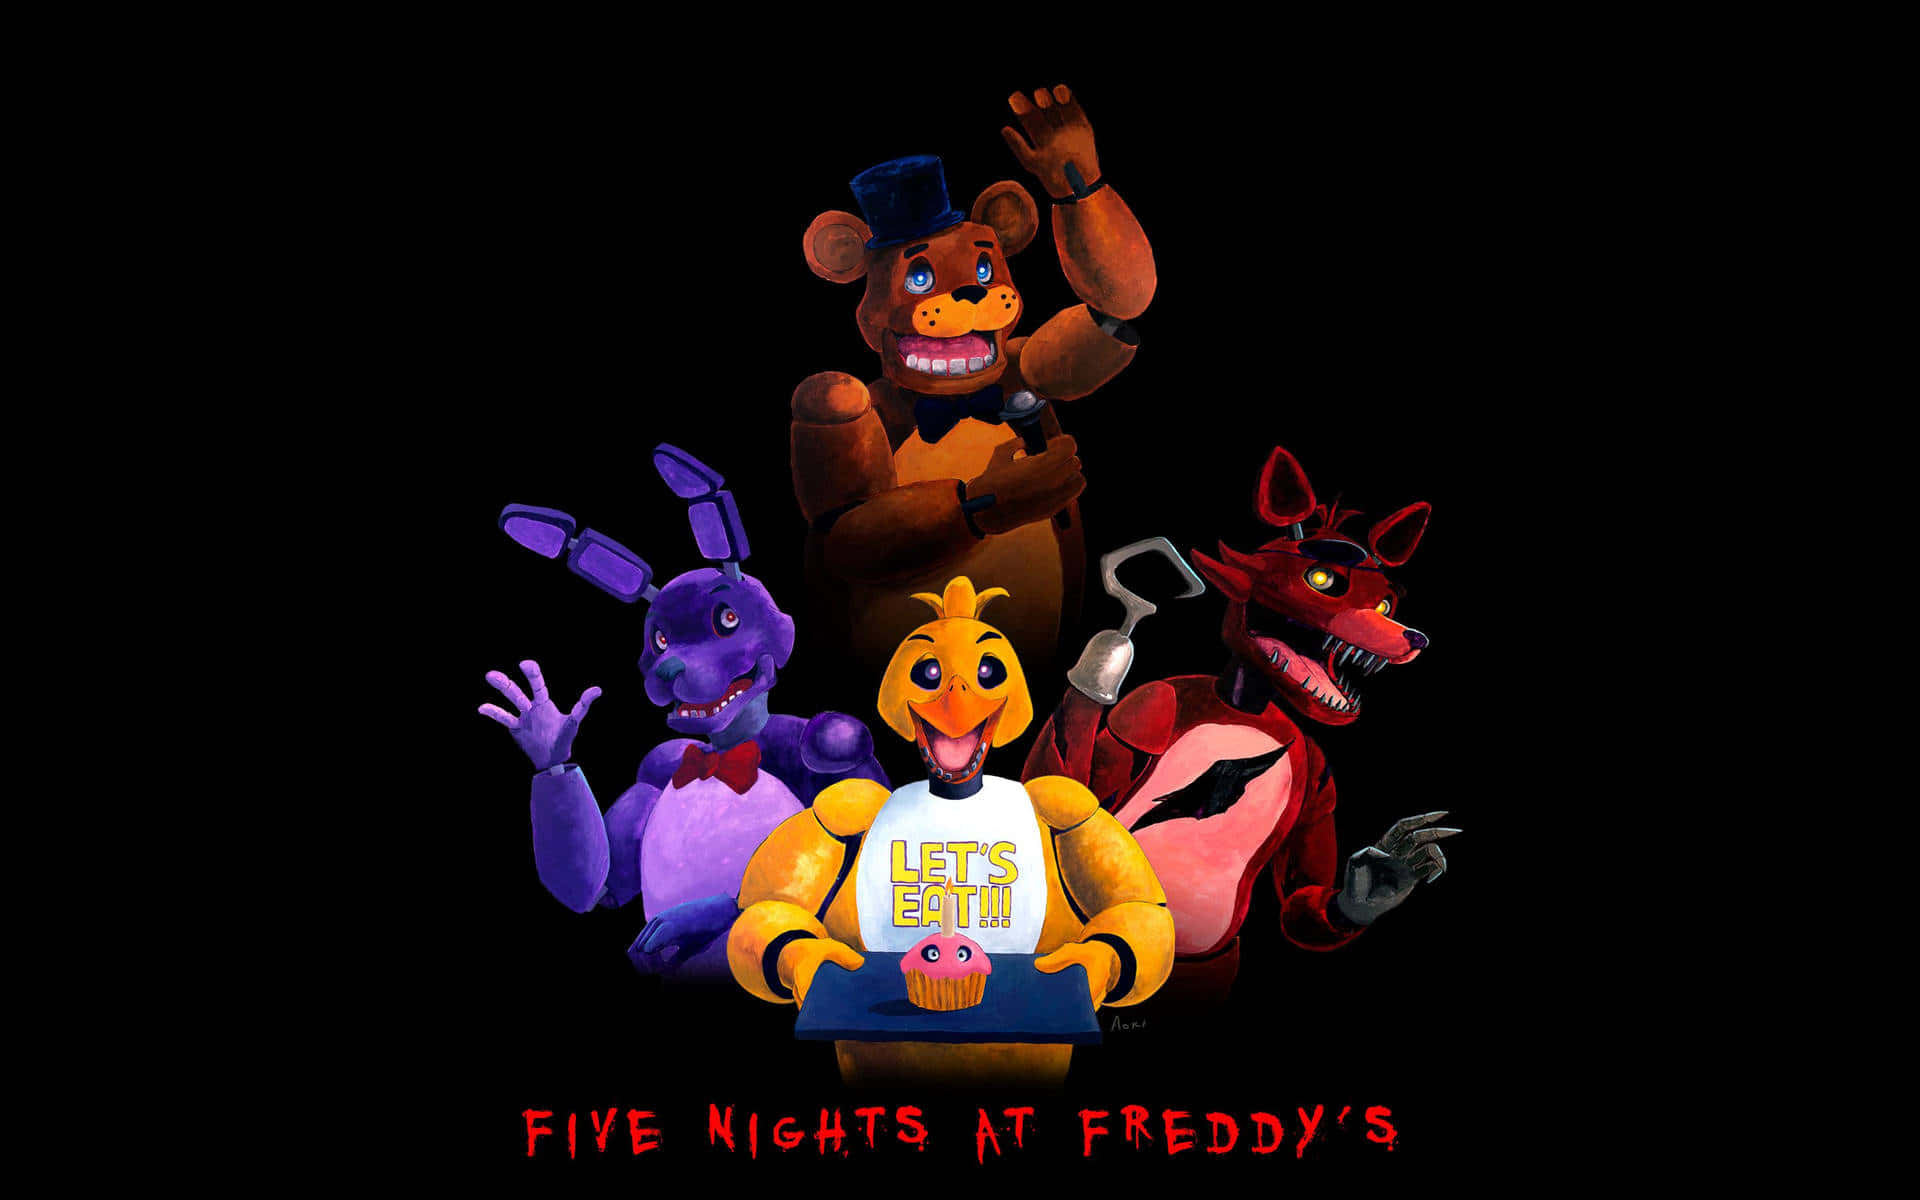 Fun And Adventure With Cutefnaf! Background